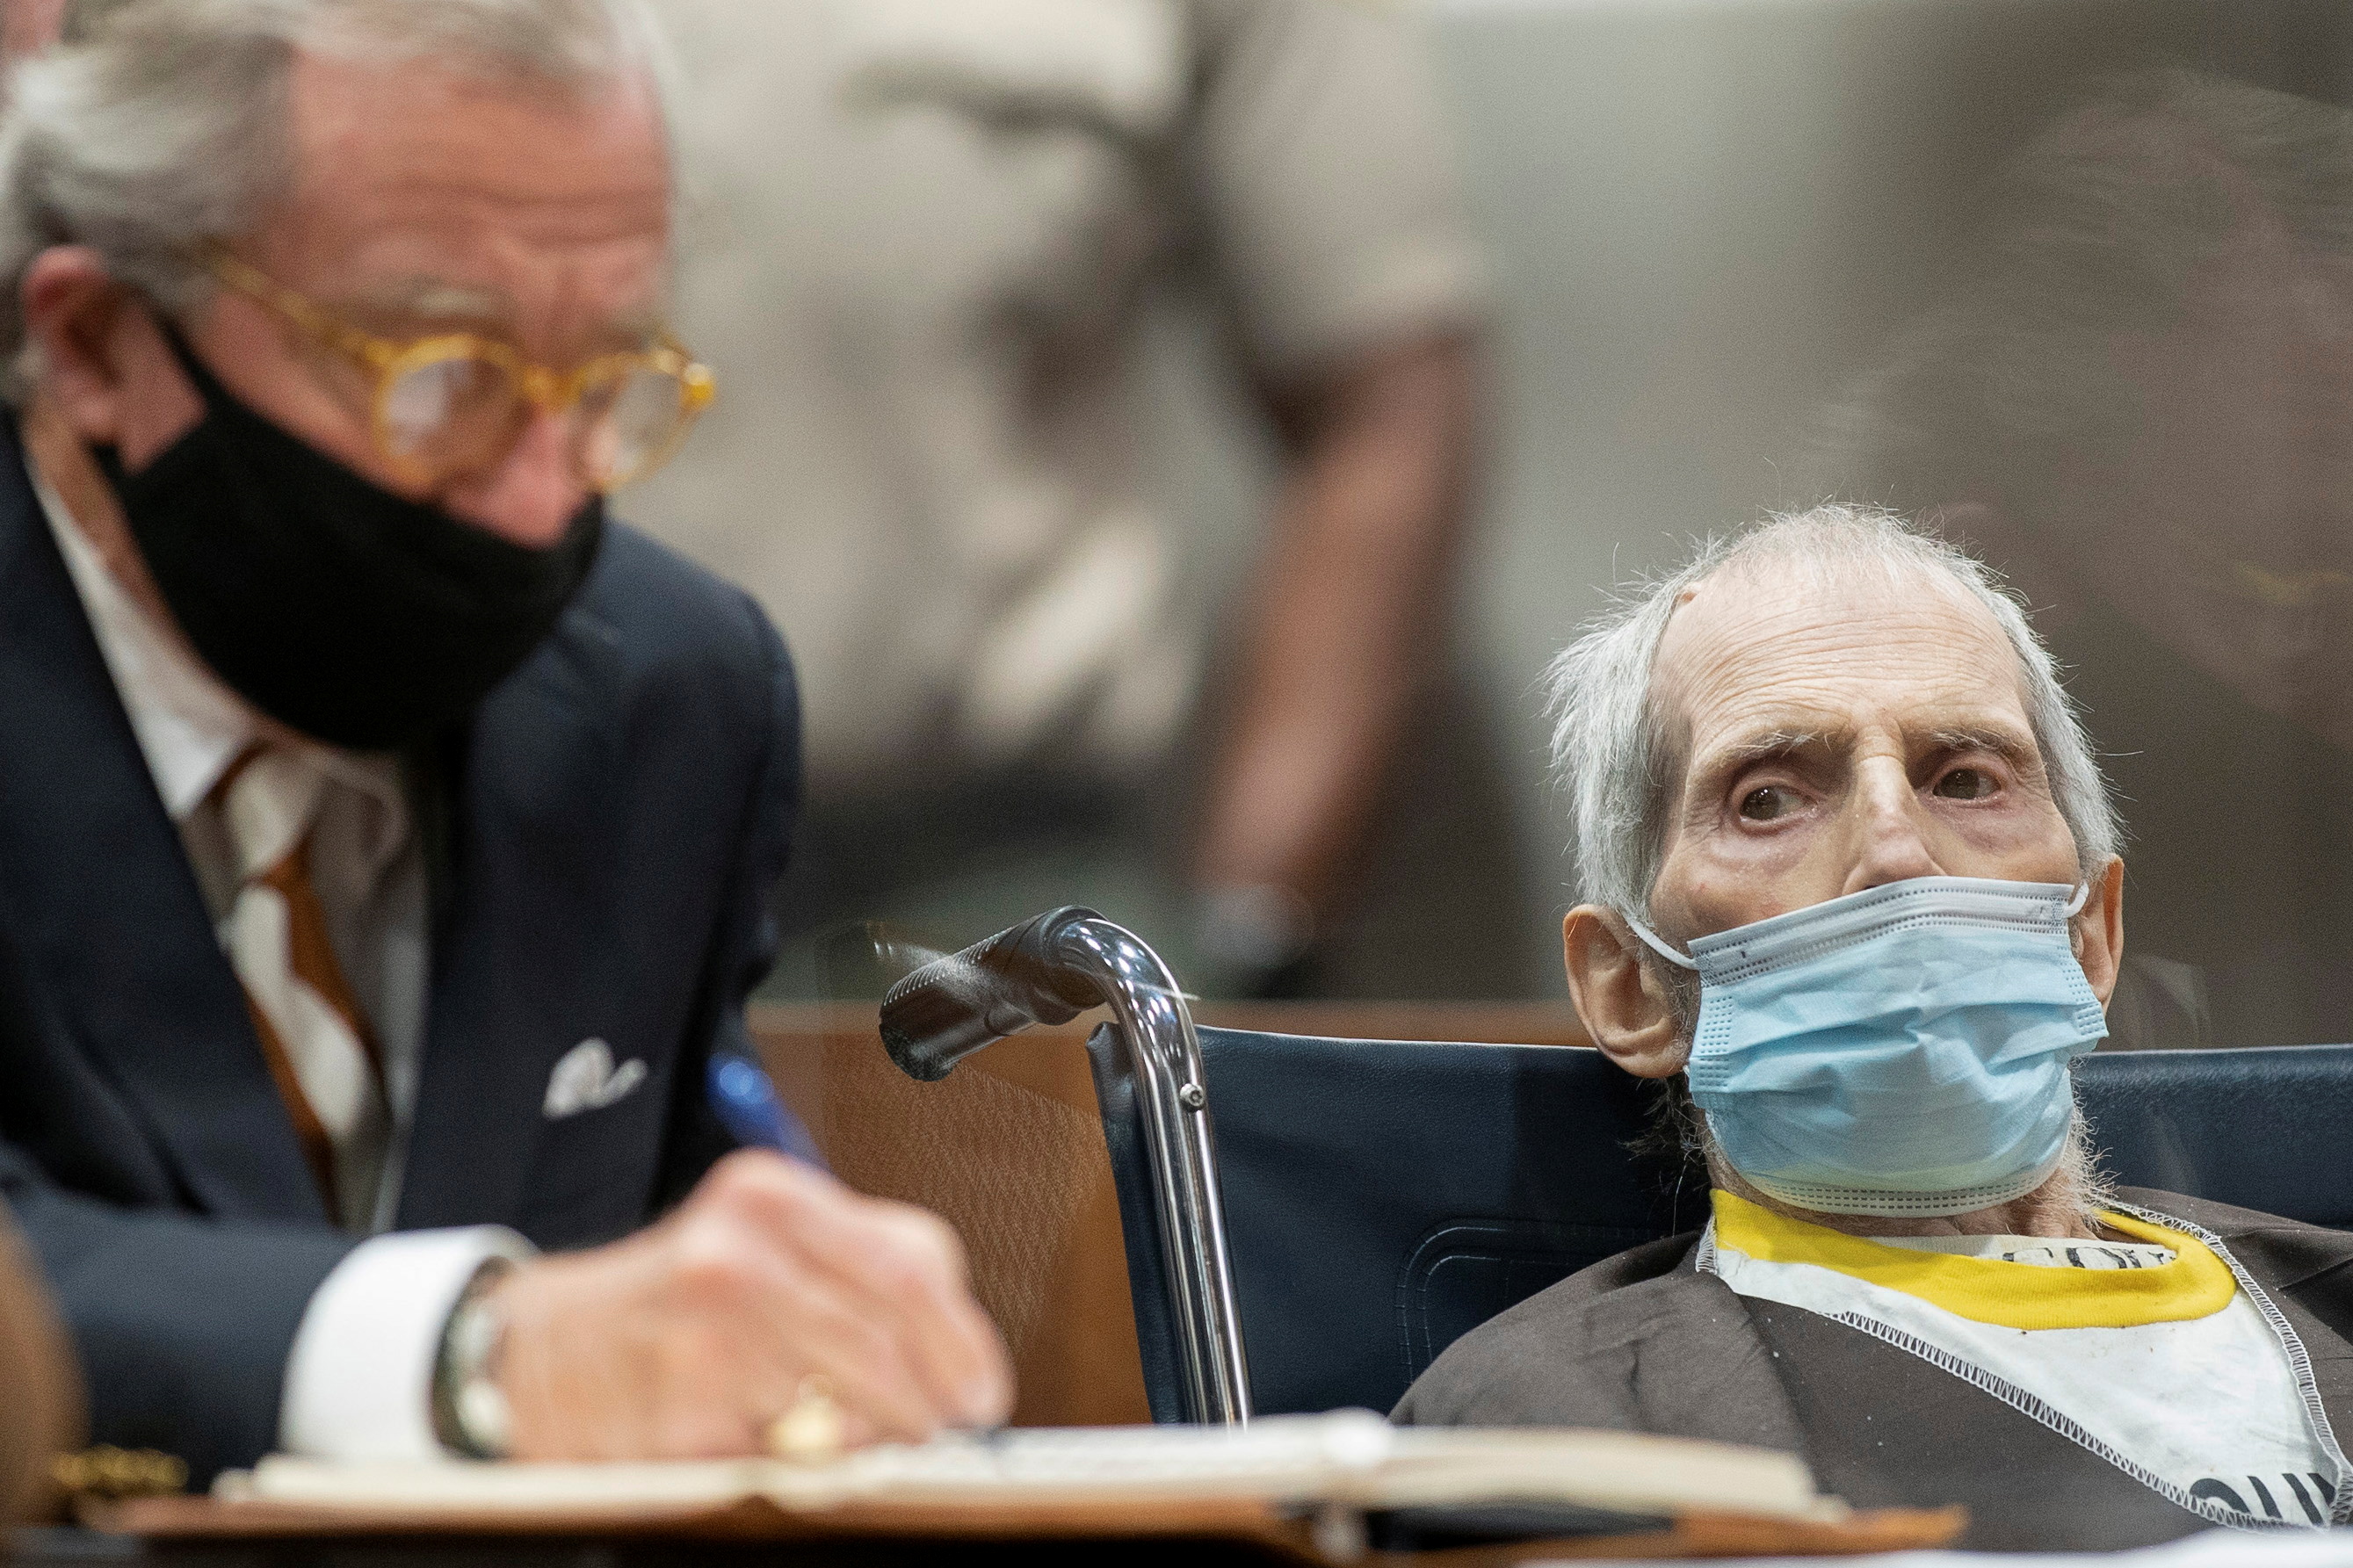 Robert Durst, seated with attorney Dick DeGuerin, was sentenced to life without possibility of parole for the killing of Susan Berman, in Los Angeles